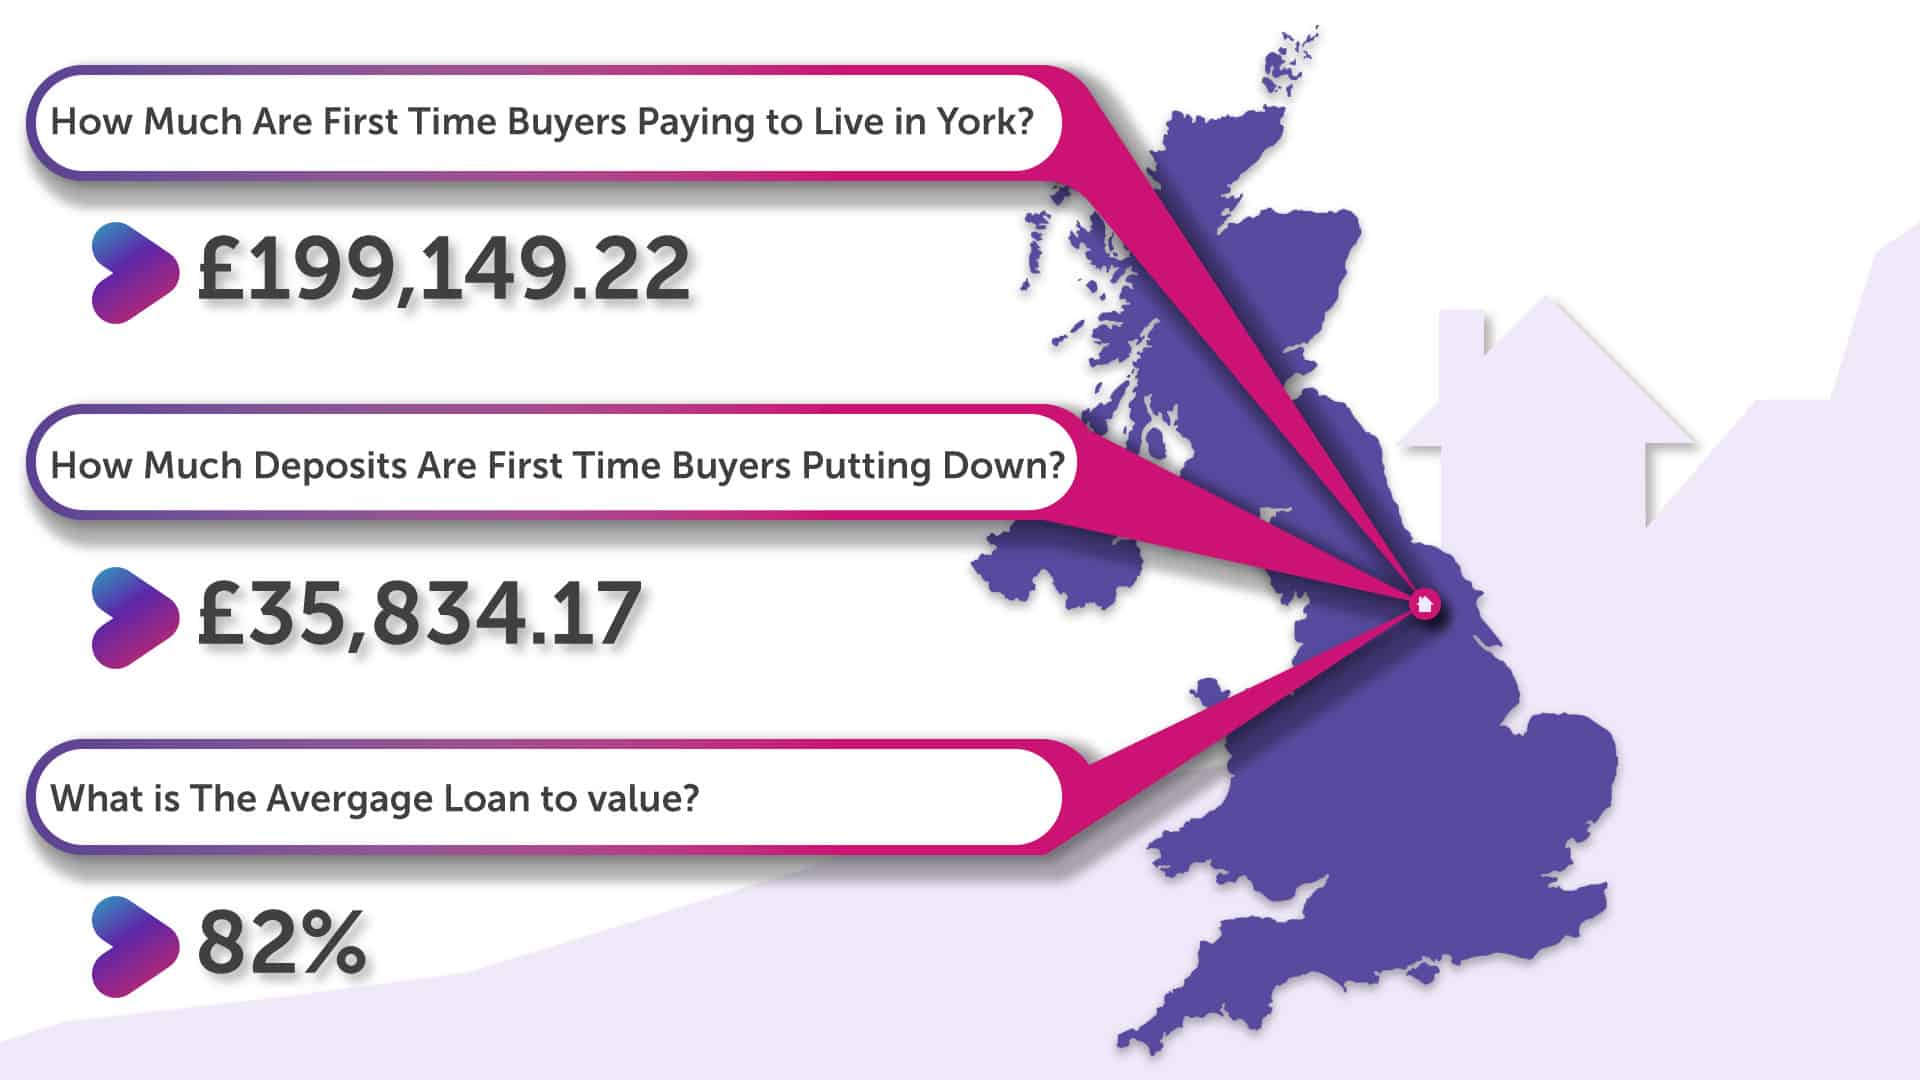 First-Time-Buyers-in-York-Infographic